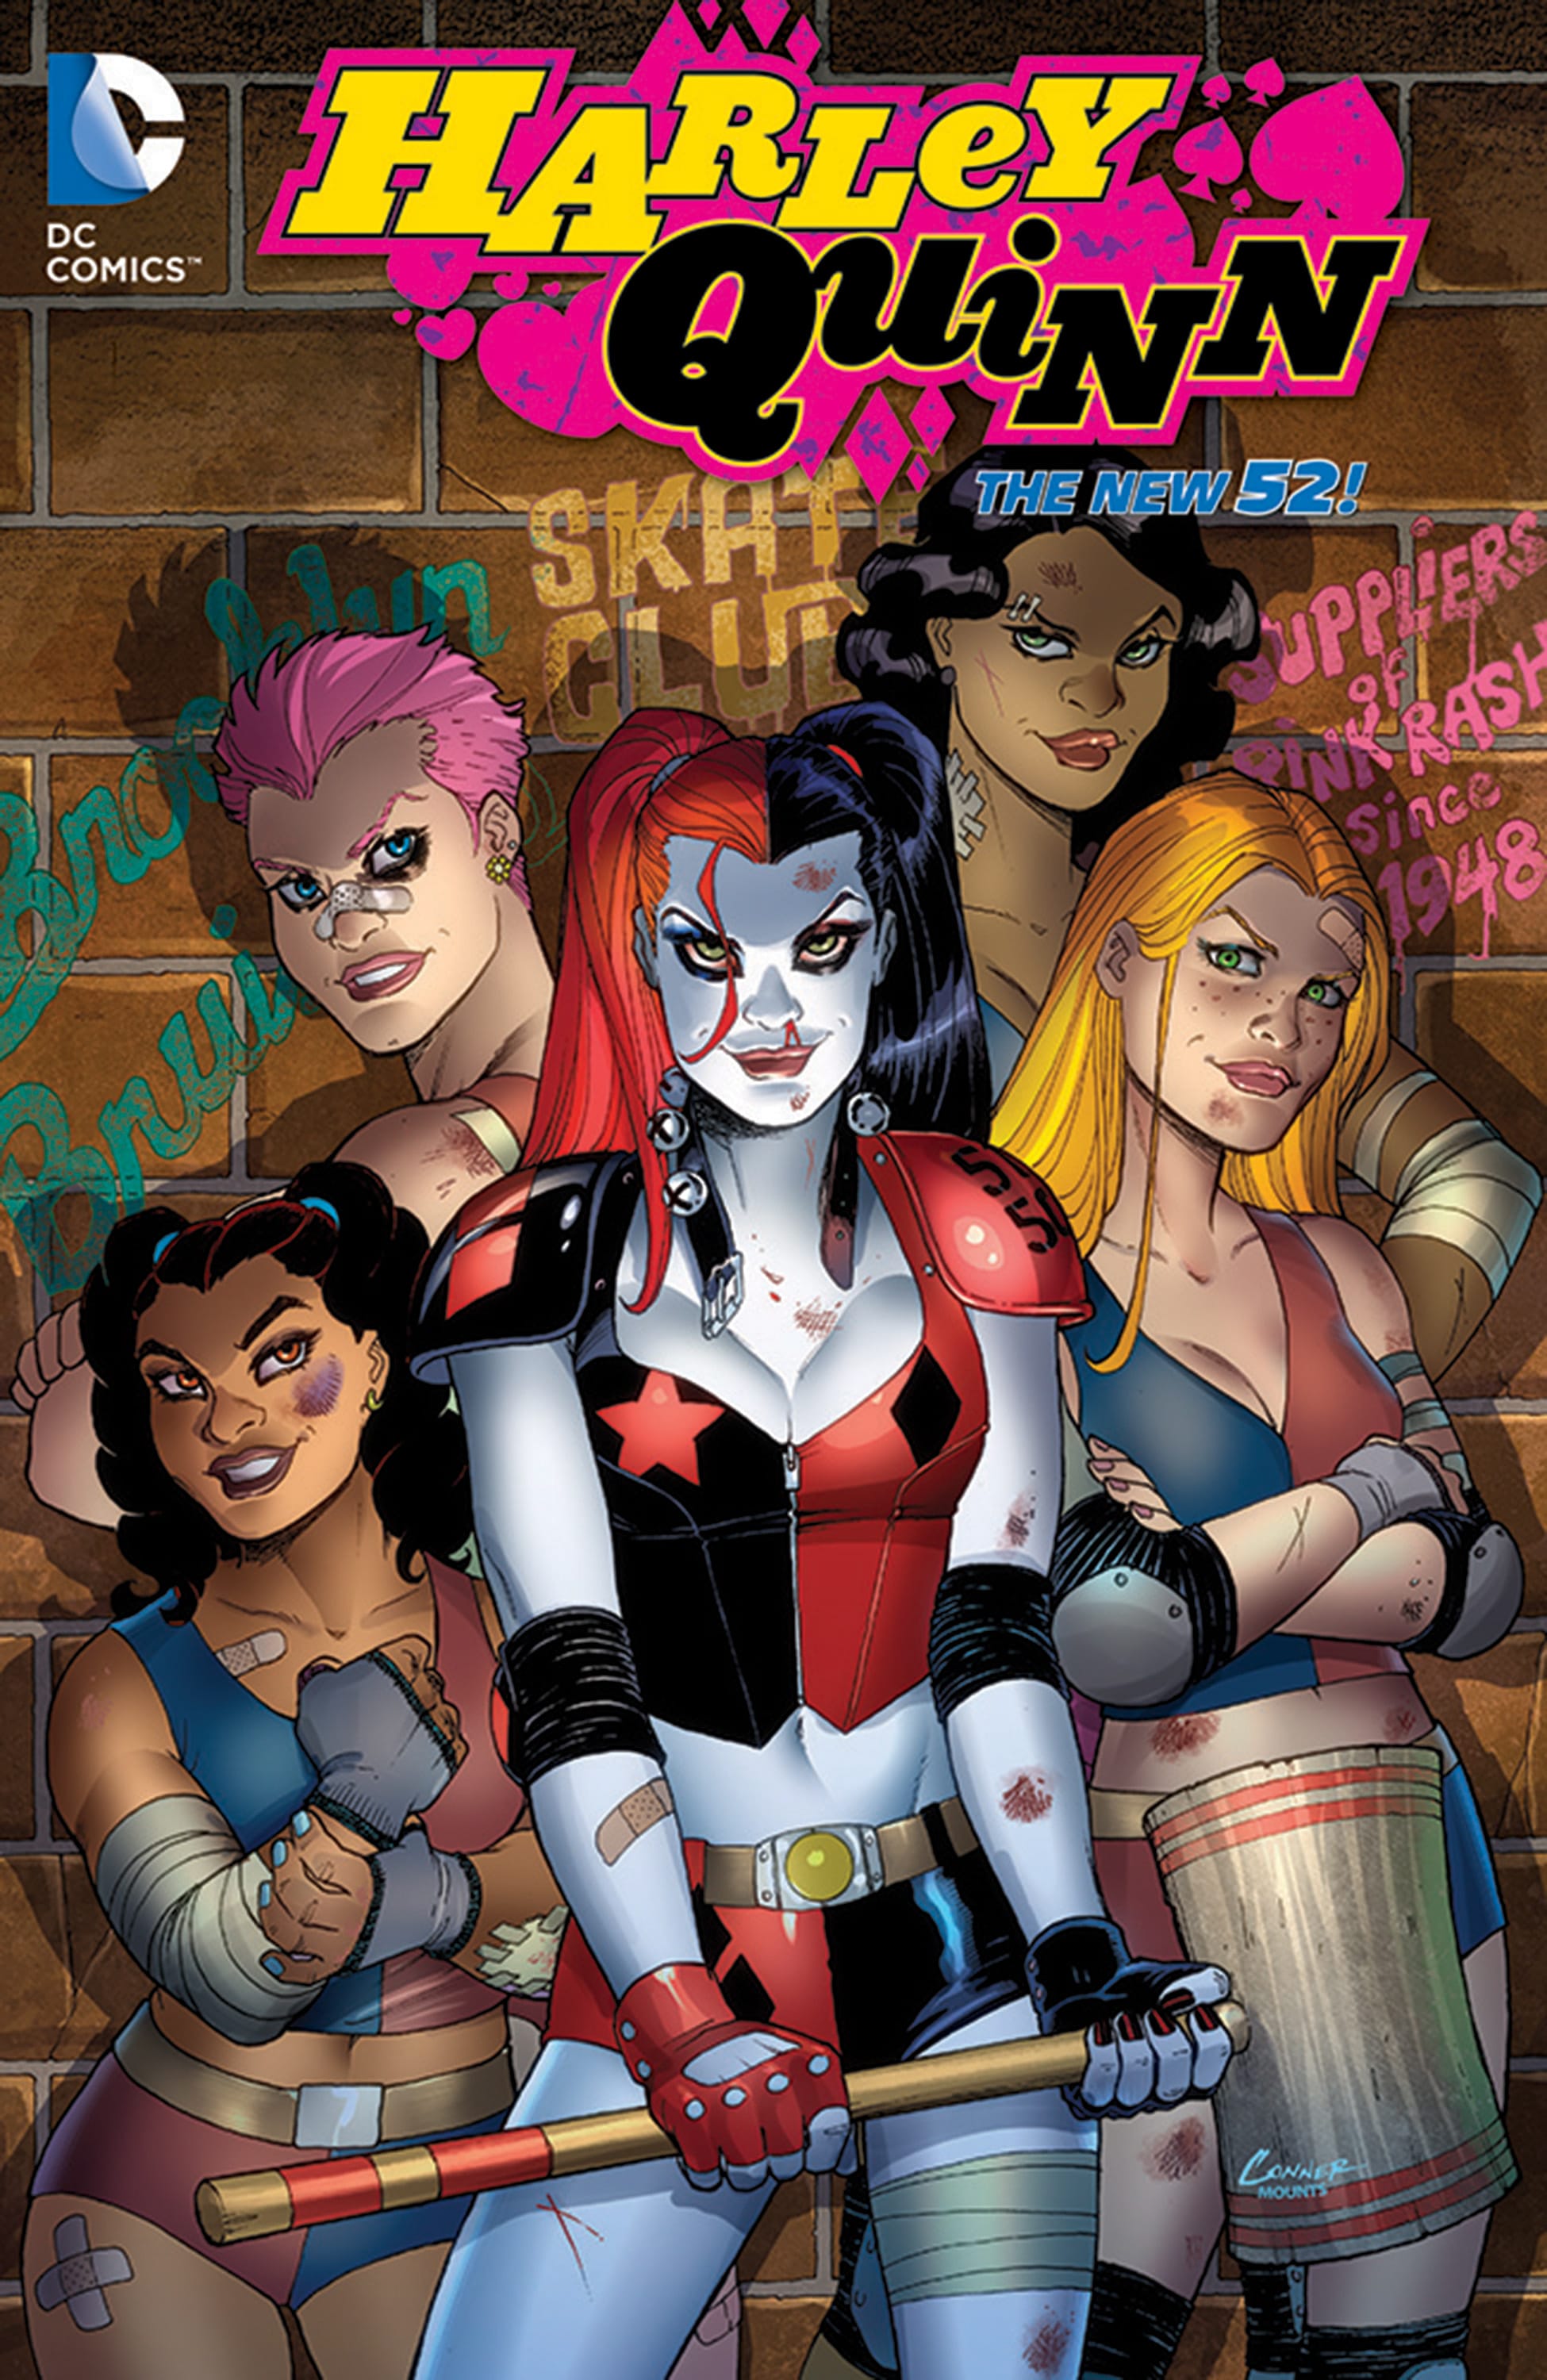 Barbara Kean may or may not be Harley Quinn, who has become one of DC's most popular characters.